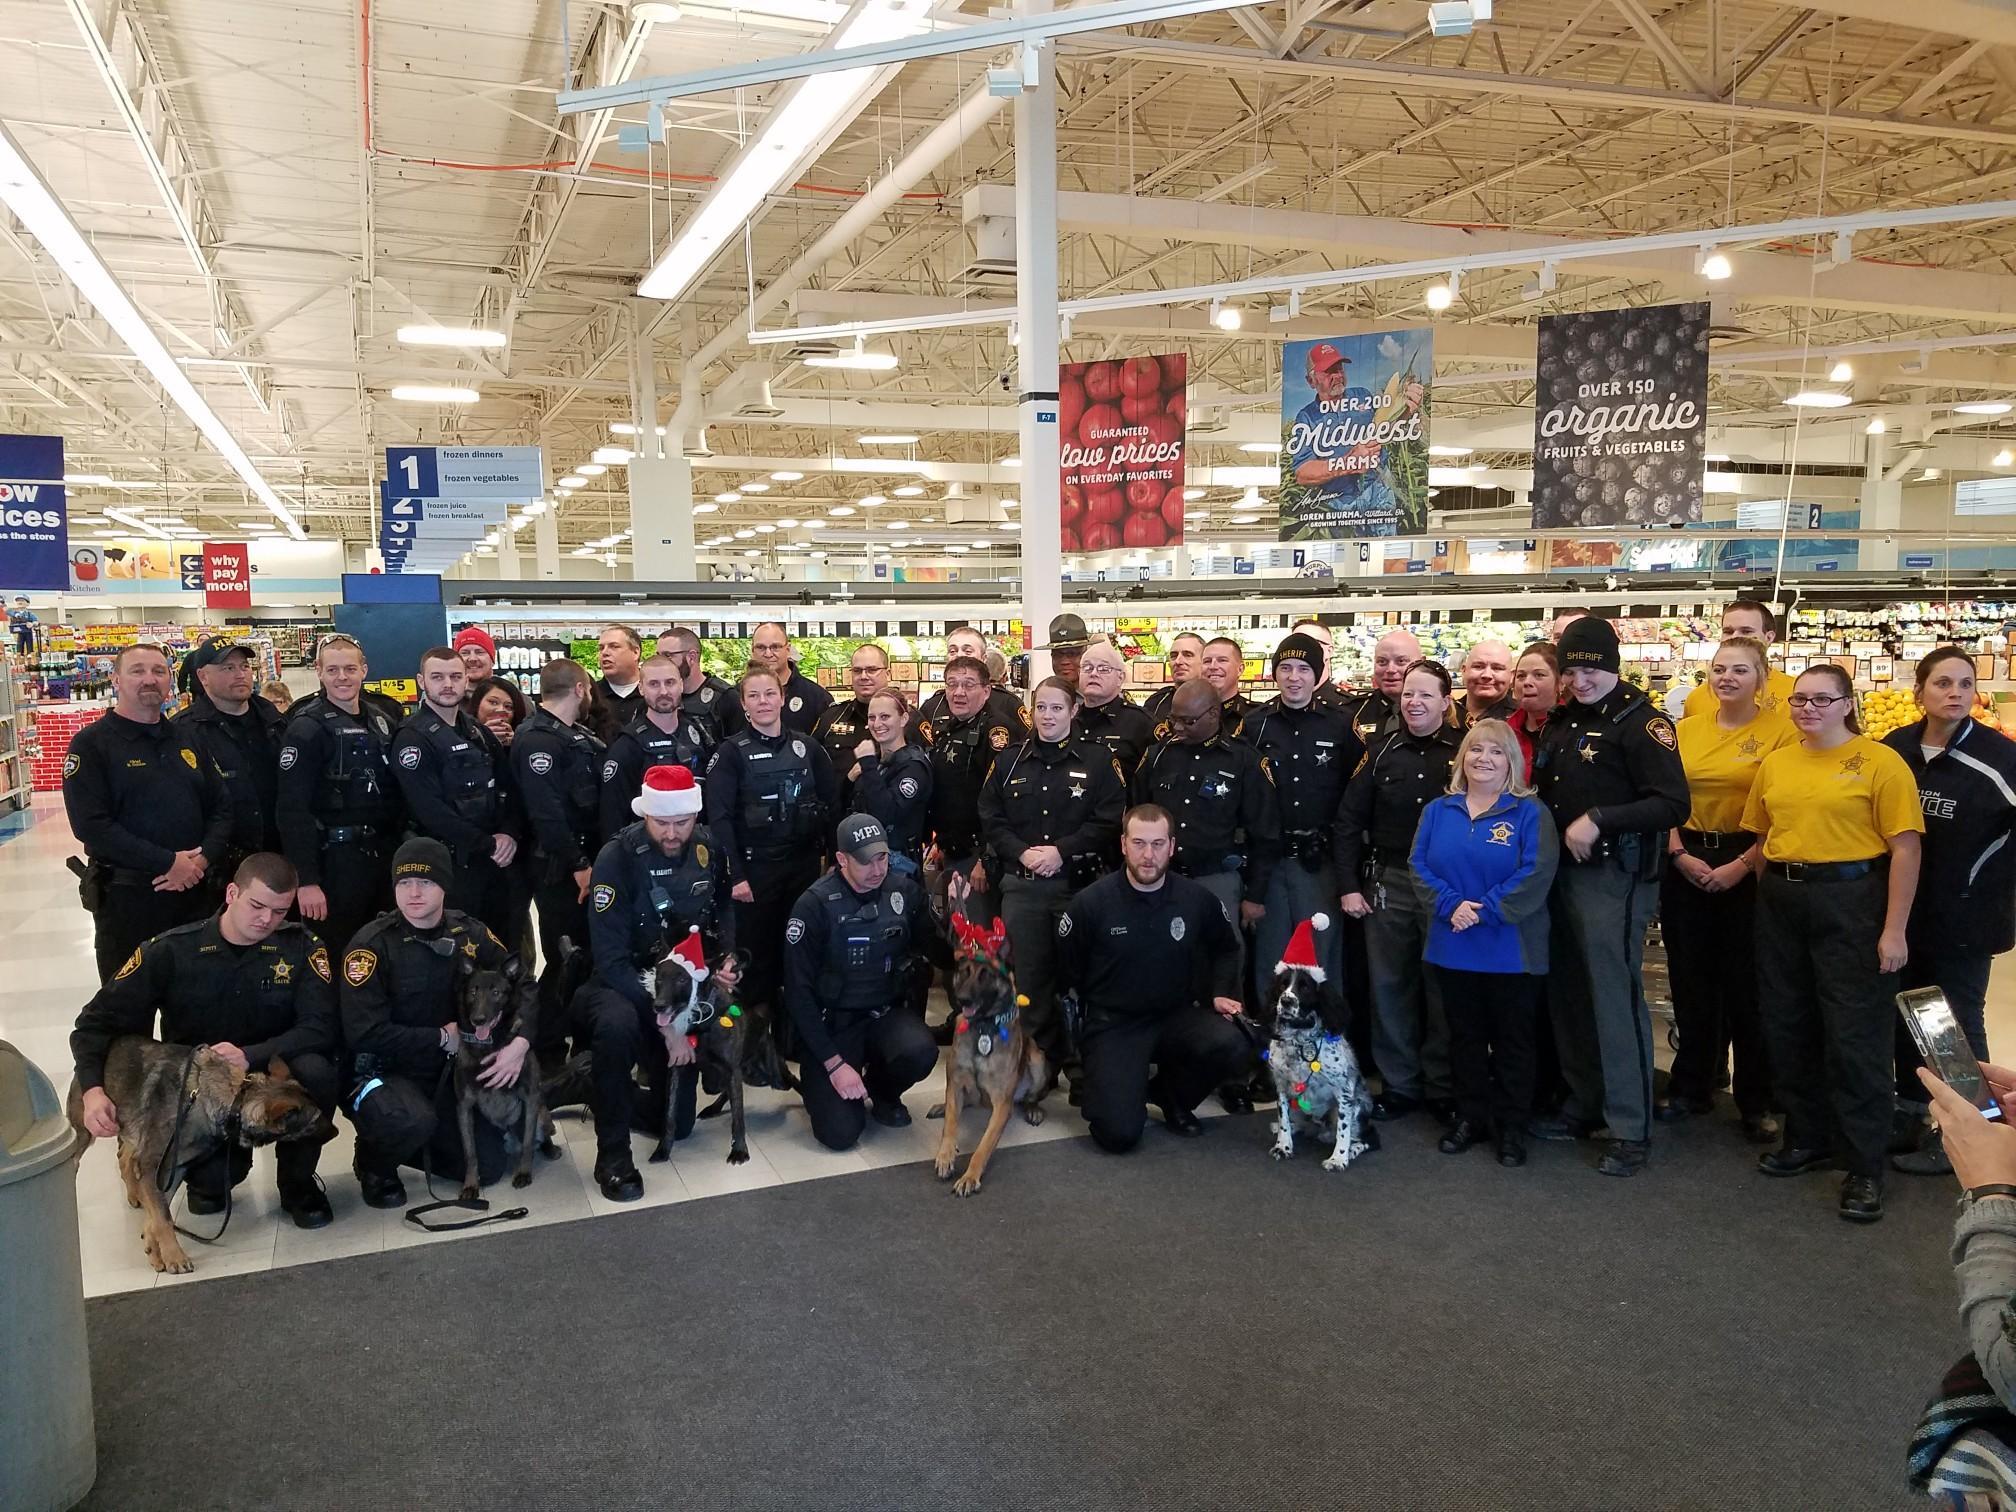  Marion area law enforcement at Meijer in Marion, Ohio and other Marion area law enforcement as part of Marion County’s FOP Cops and Kids event